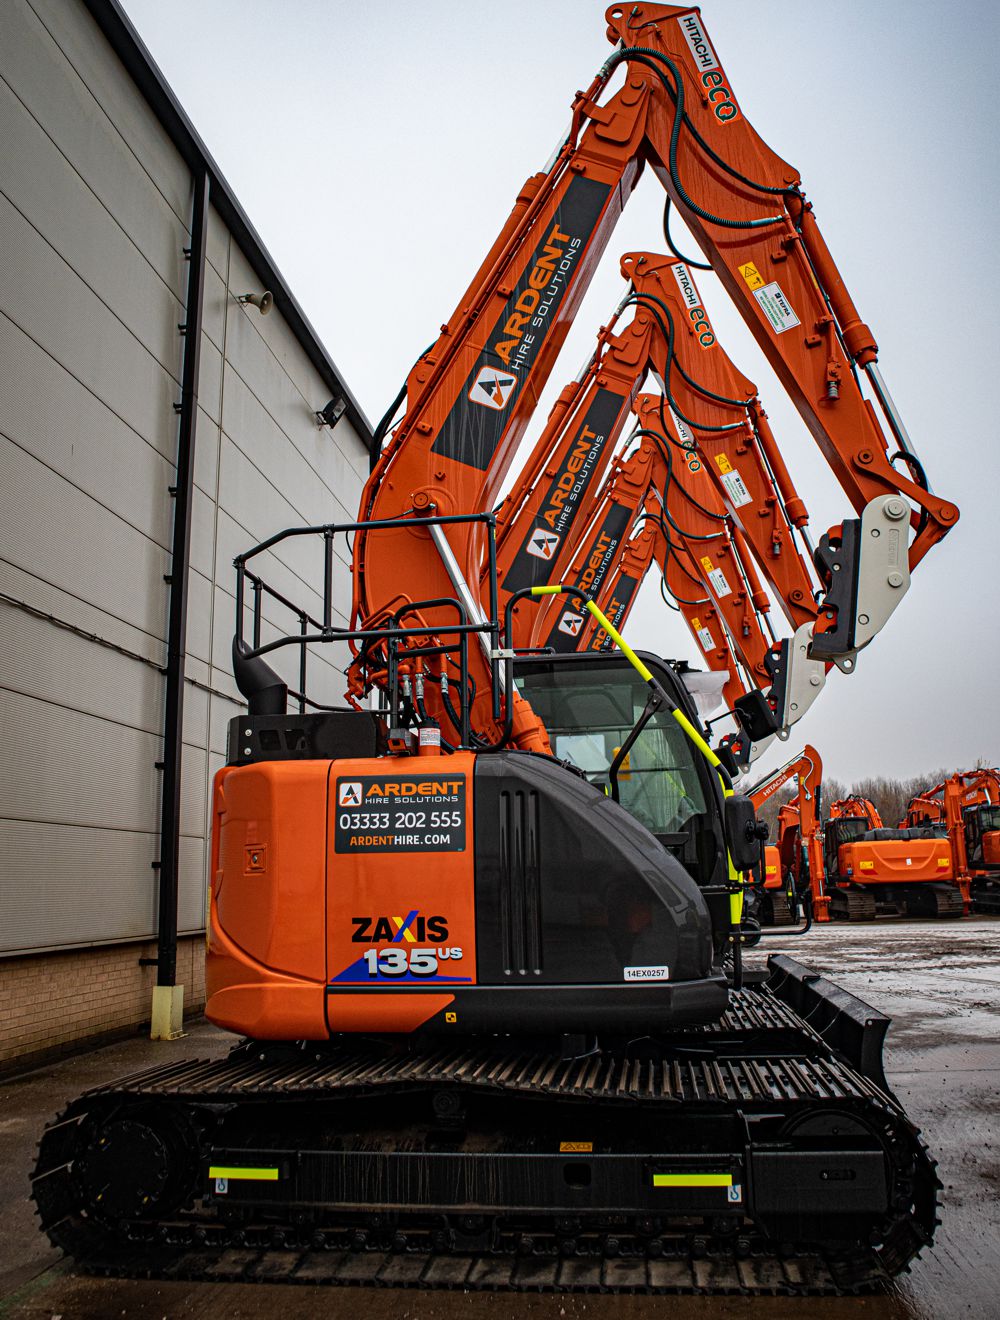 Hire company adds to £2m Hitachi Construction Equipment investment for Christmas